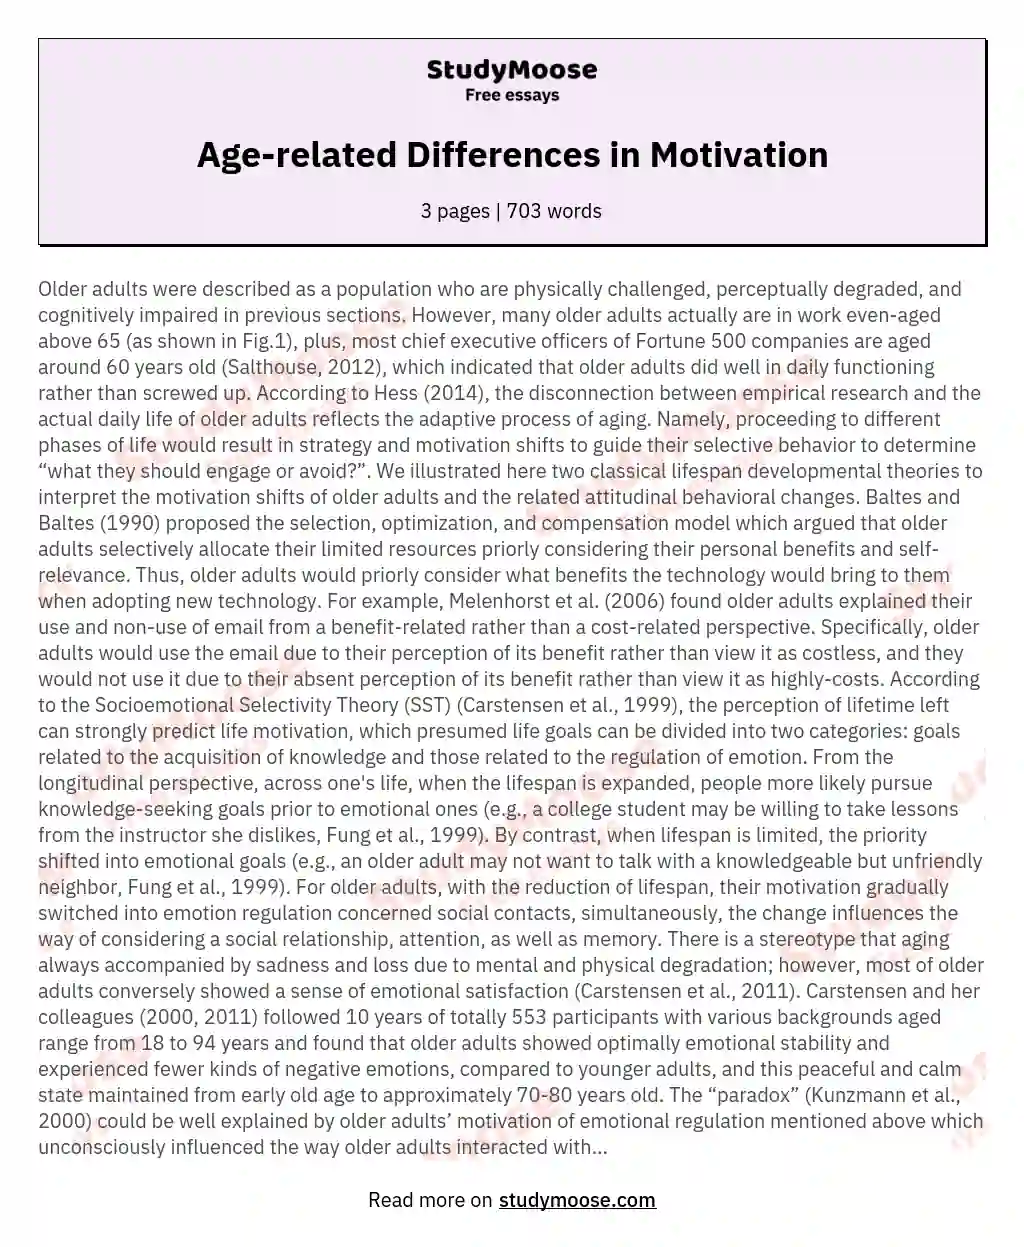 Age-related Differences in Motivation essay